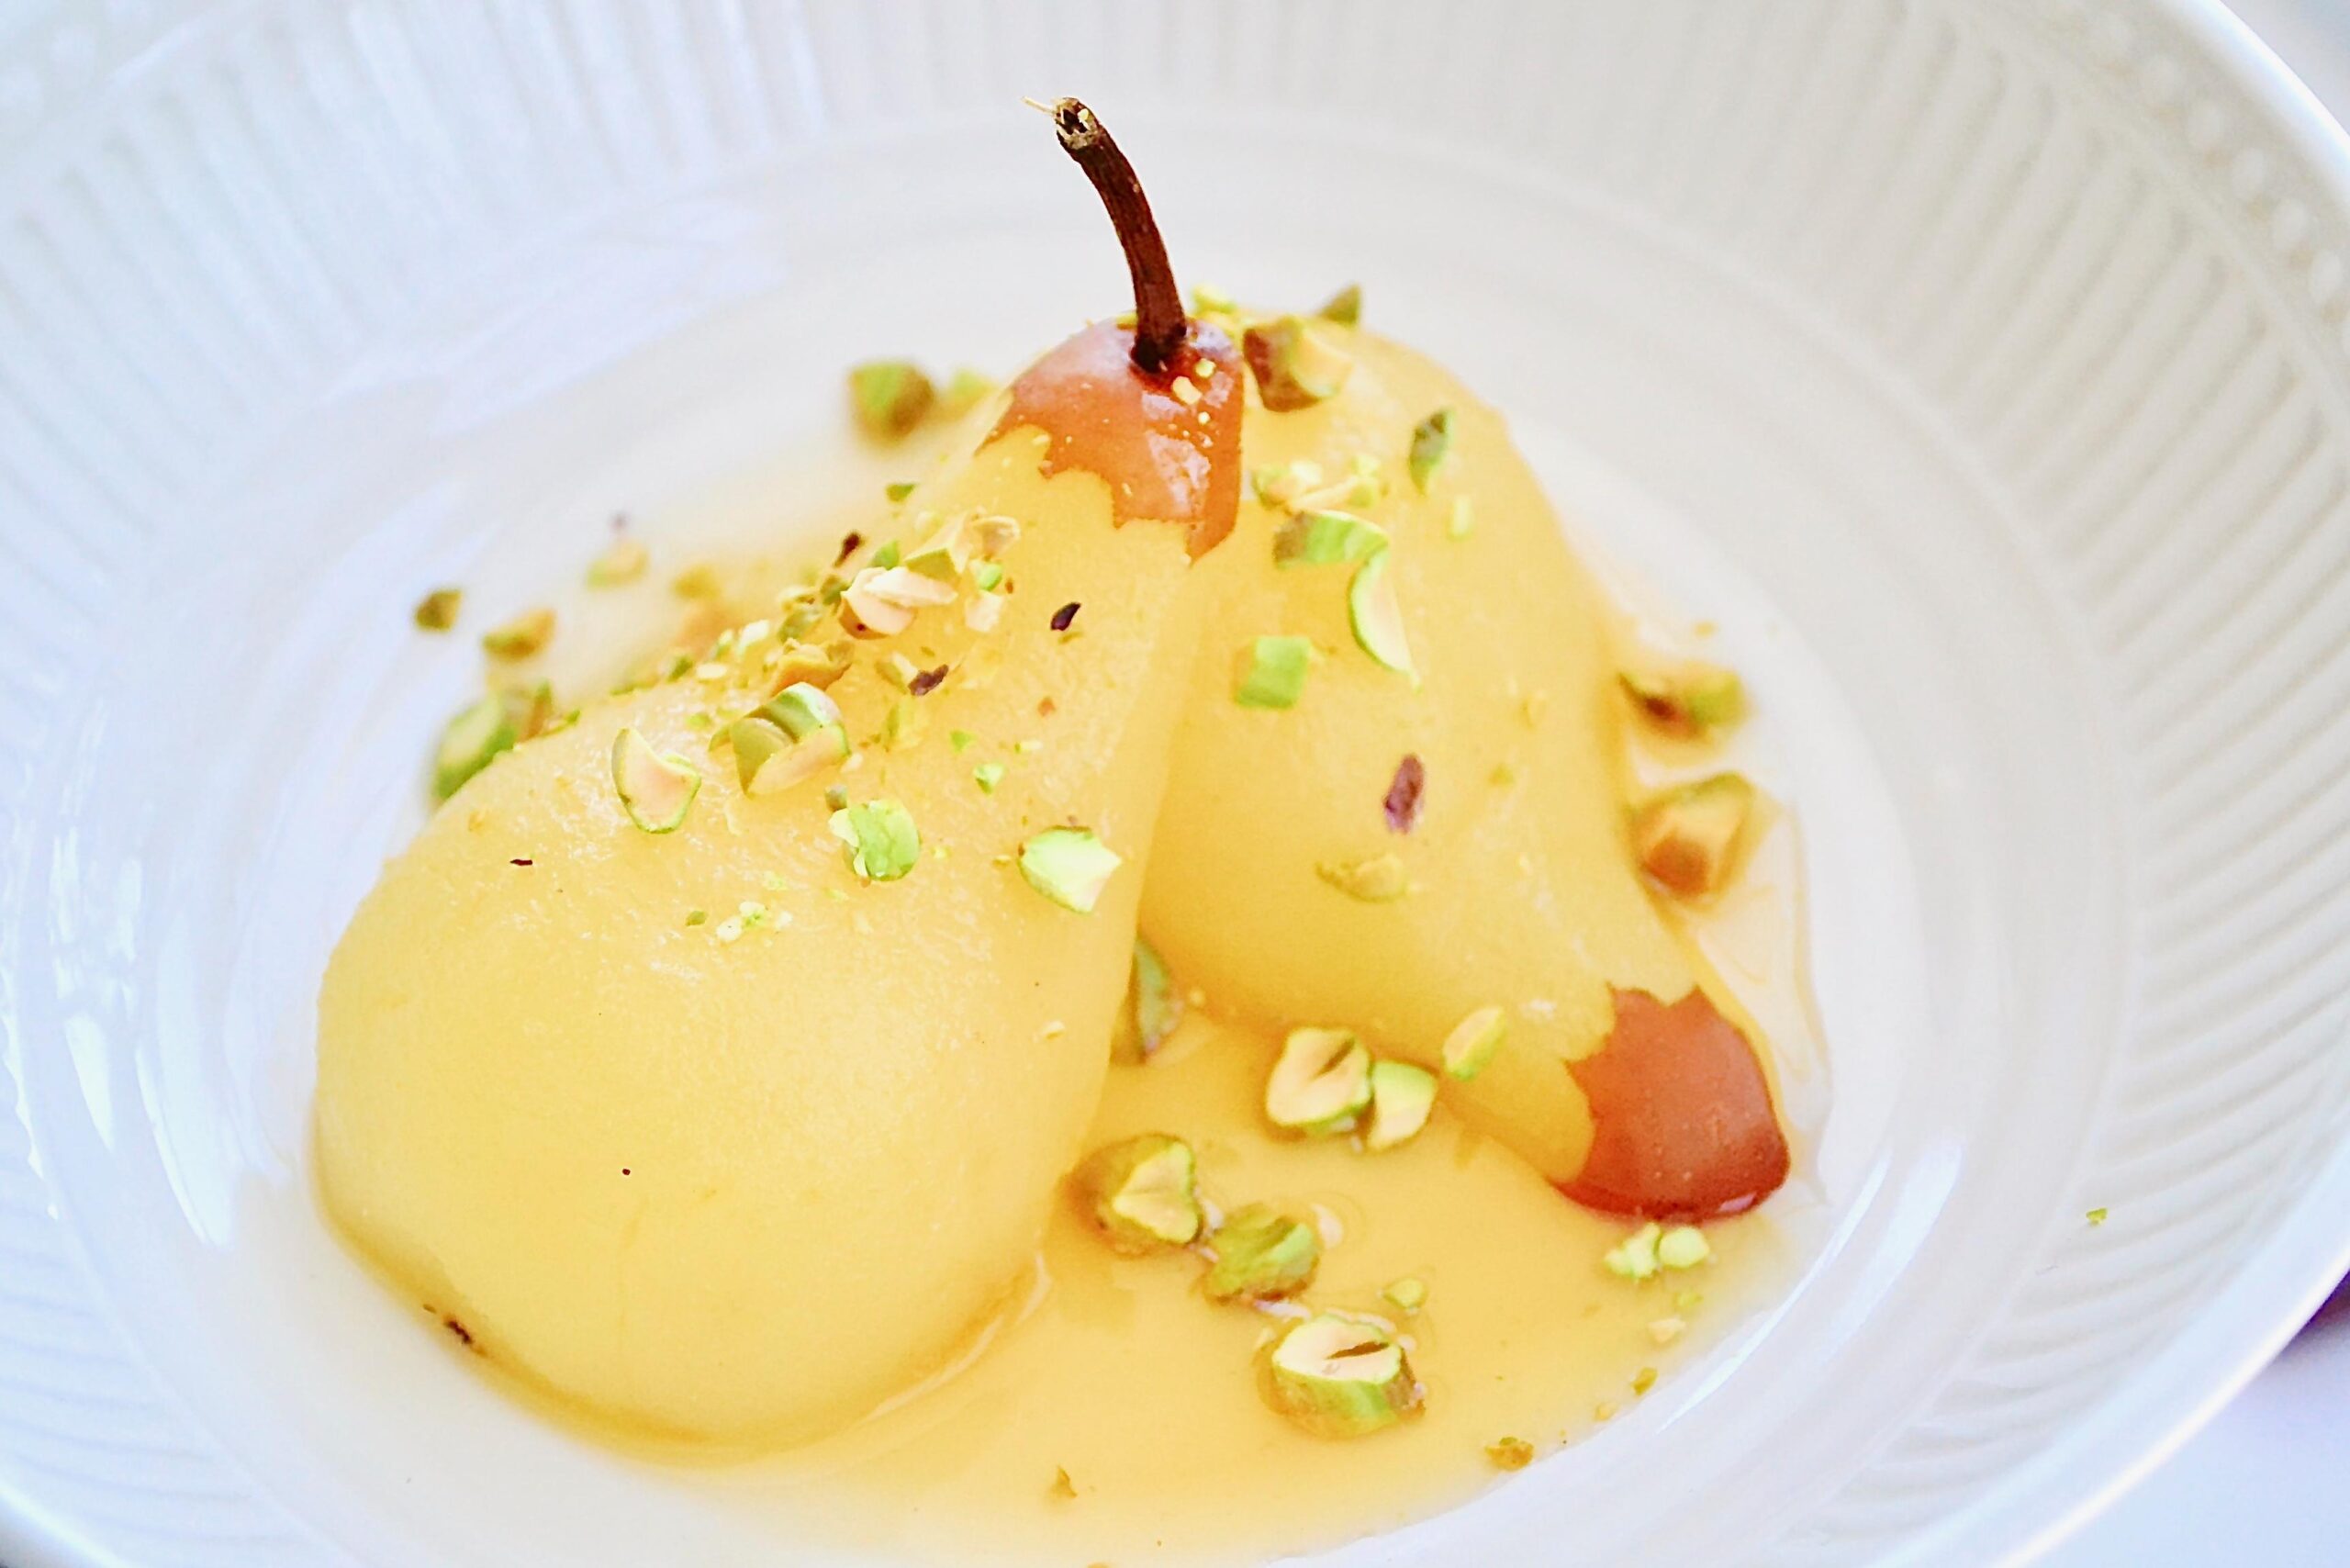  This recipe is a luxurious twist on the classic poached pear dessert.